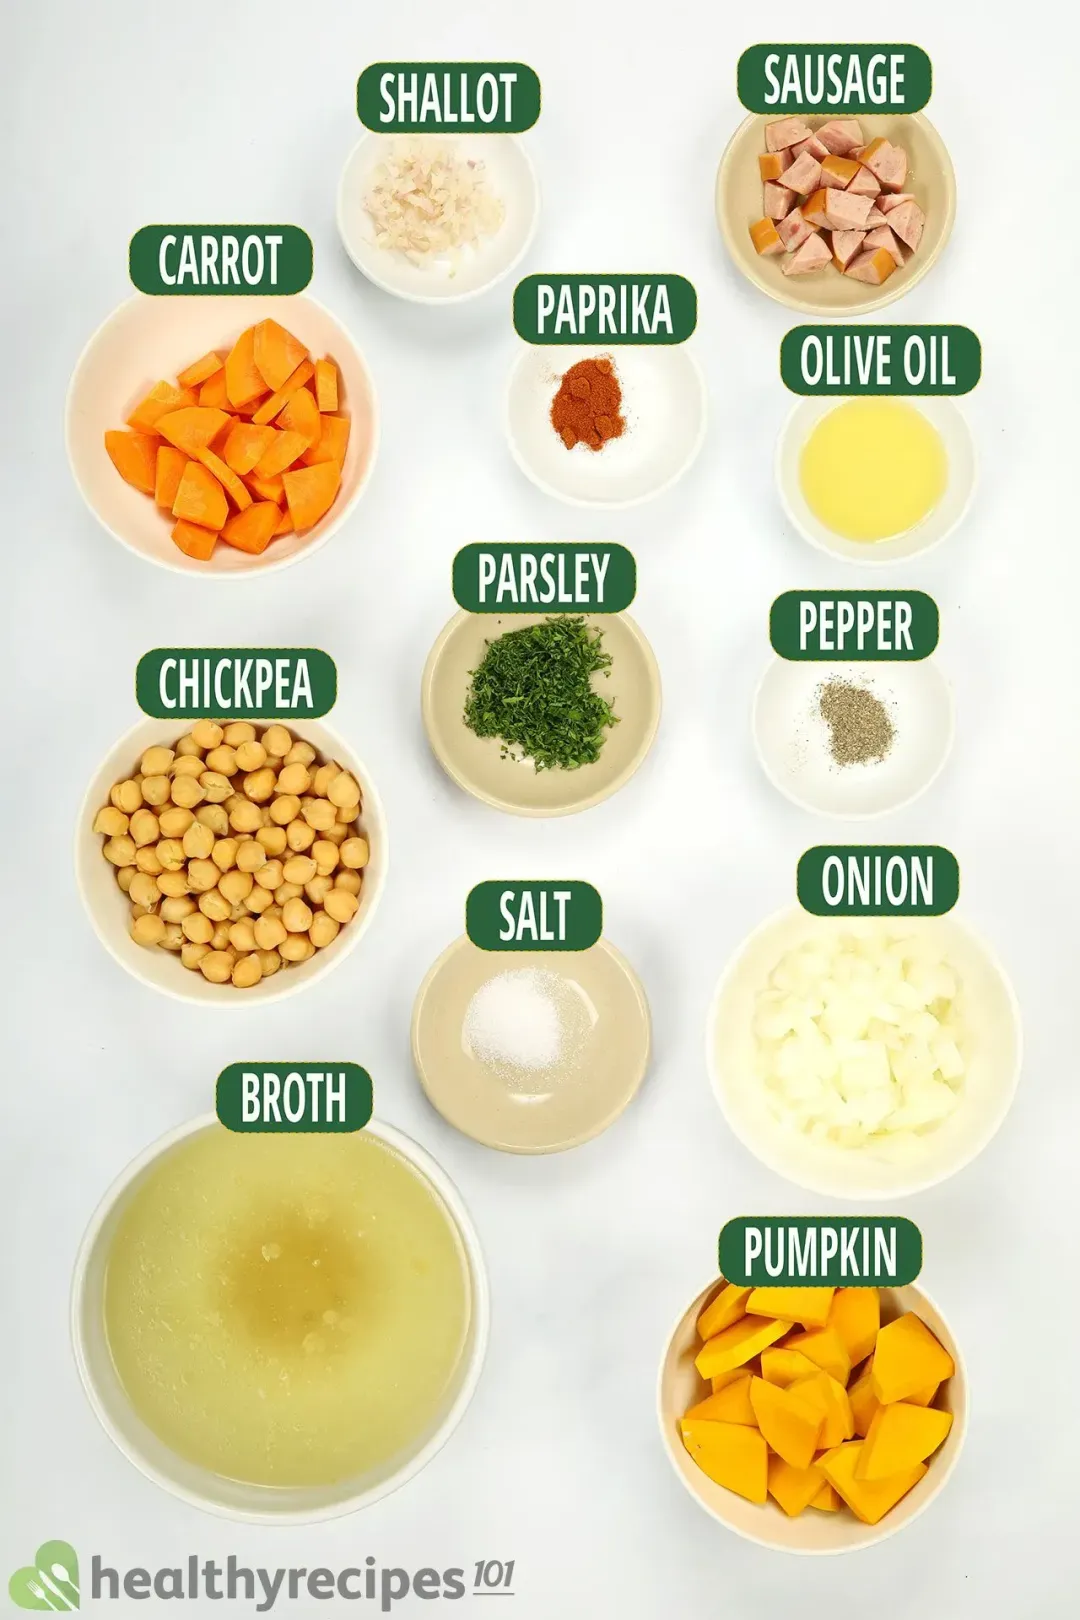 Ingredients for Chickpea Soup